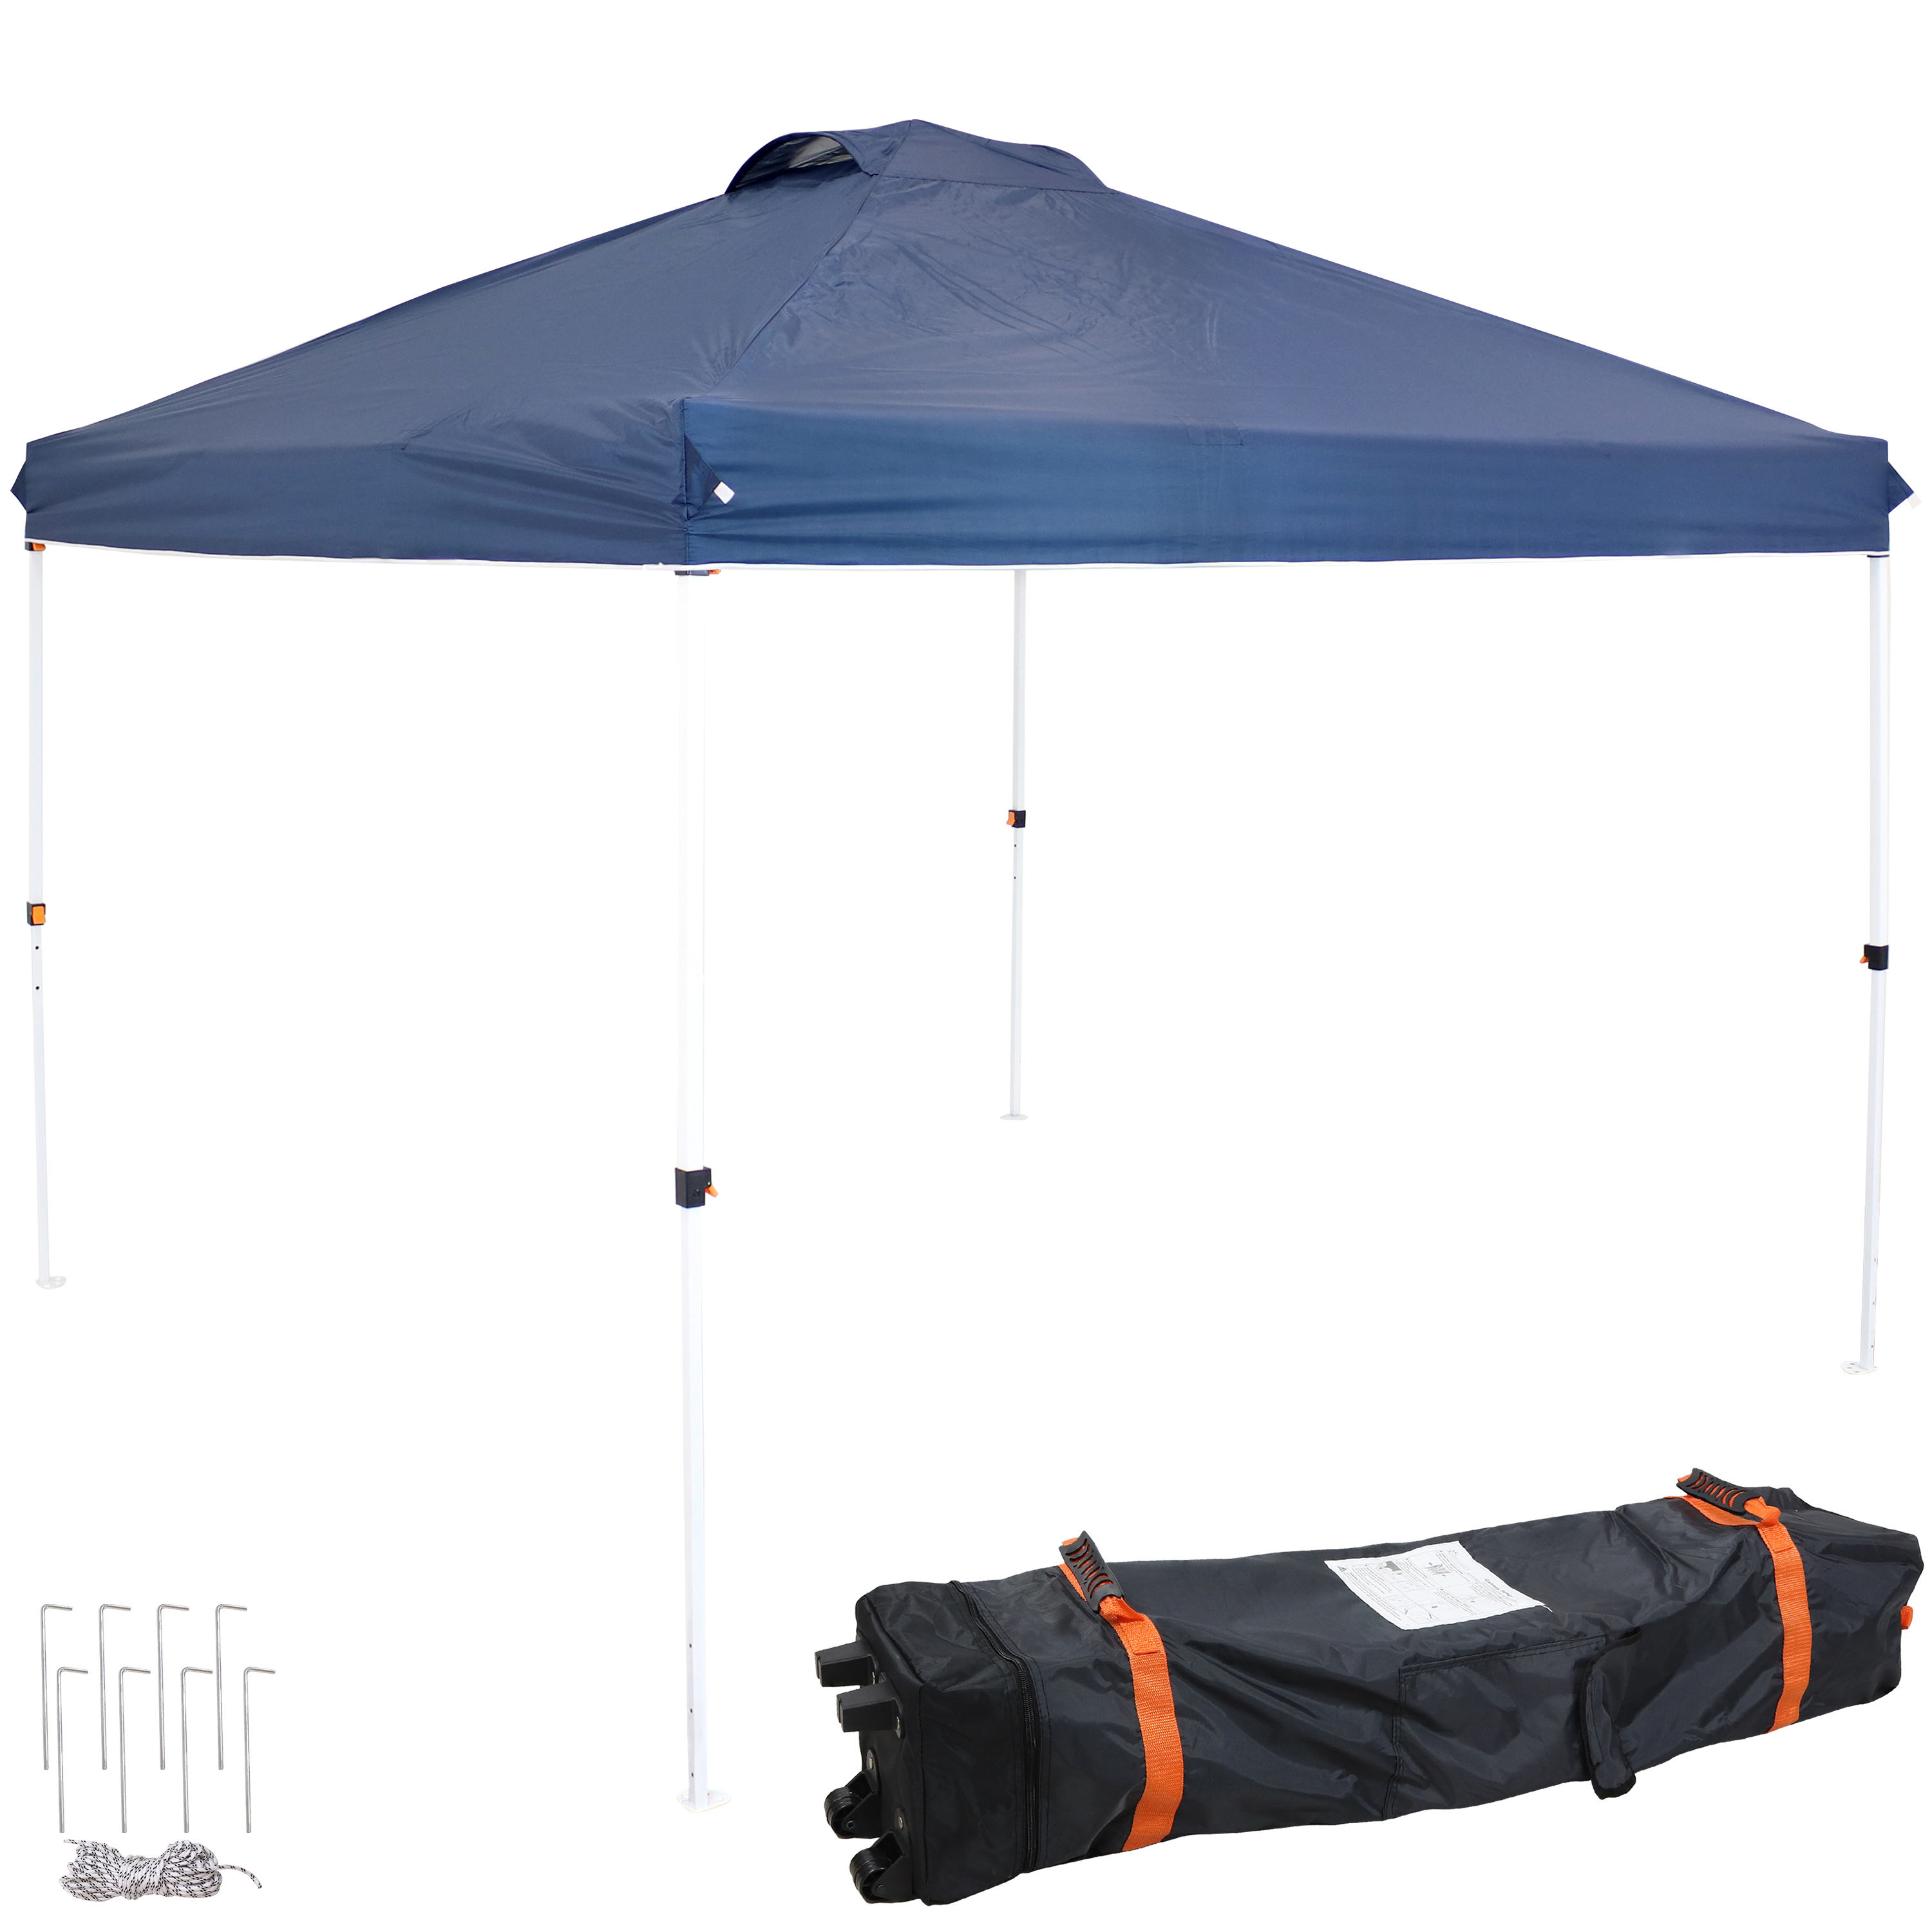 Sunnydaze 12x12 Foot Premium Pop-Up Canopy with Rolling Carry Bag - Blue